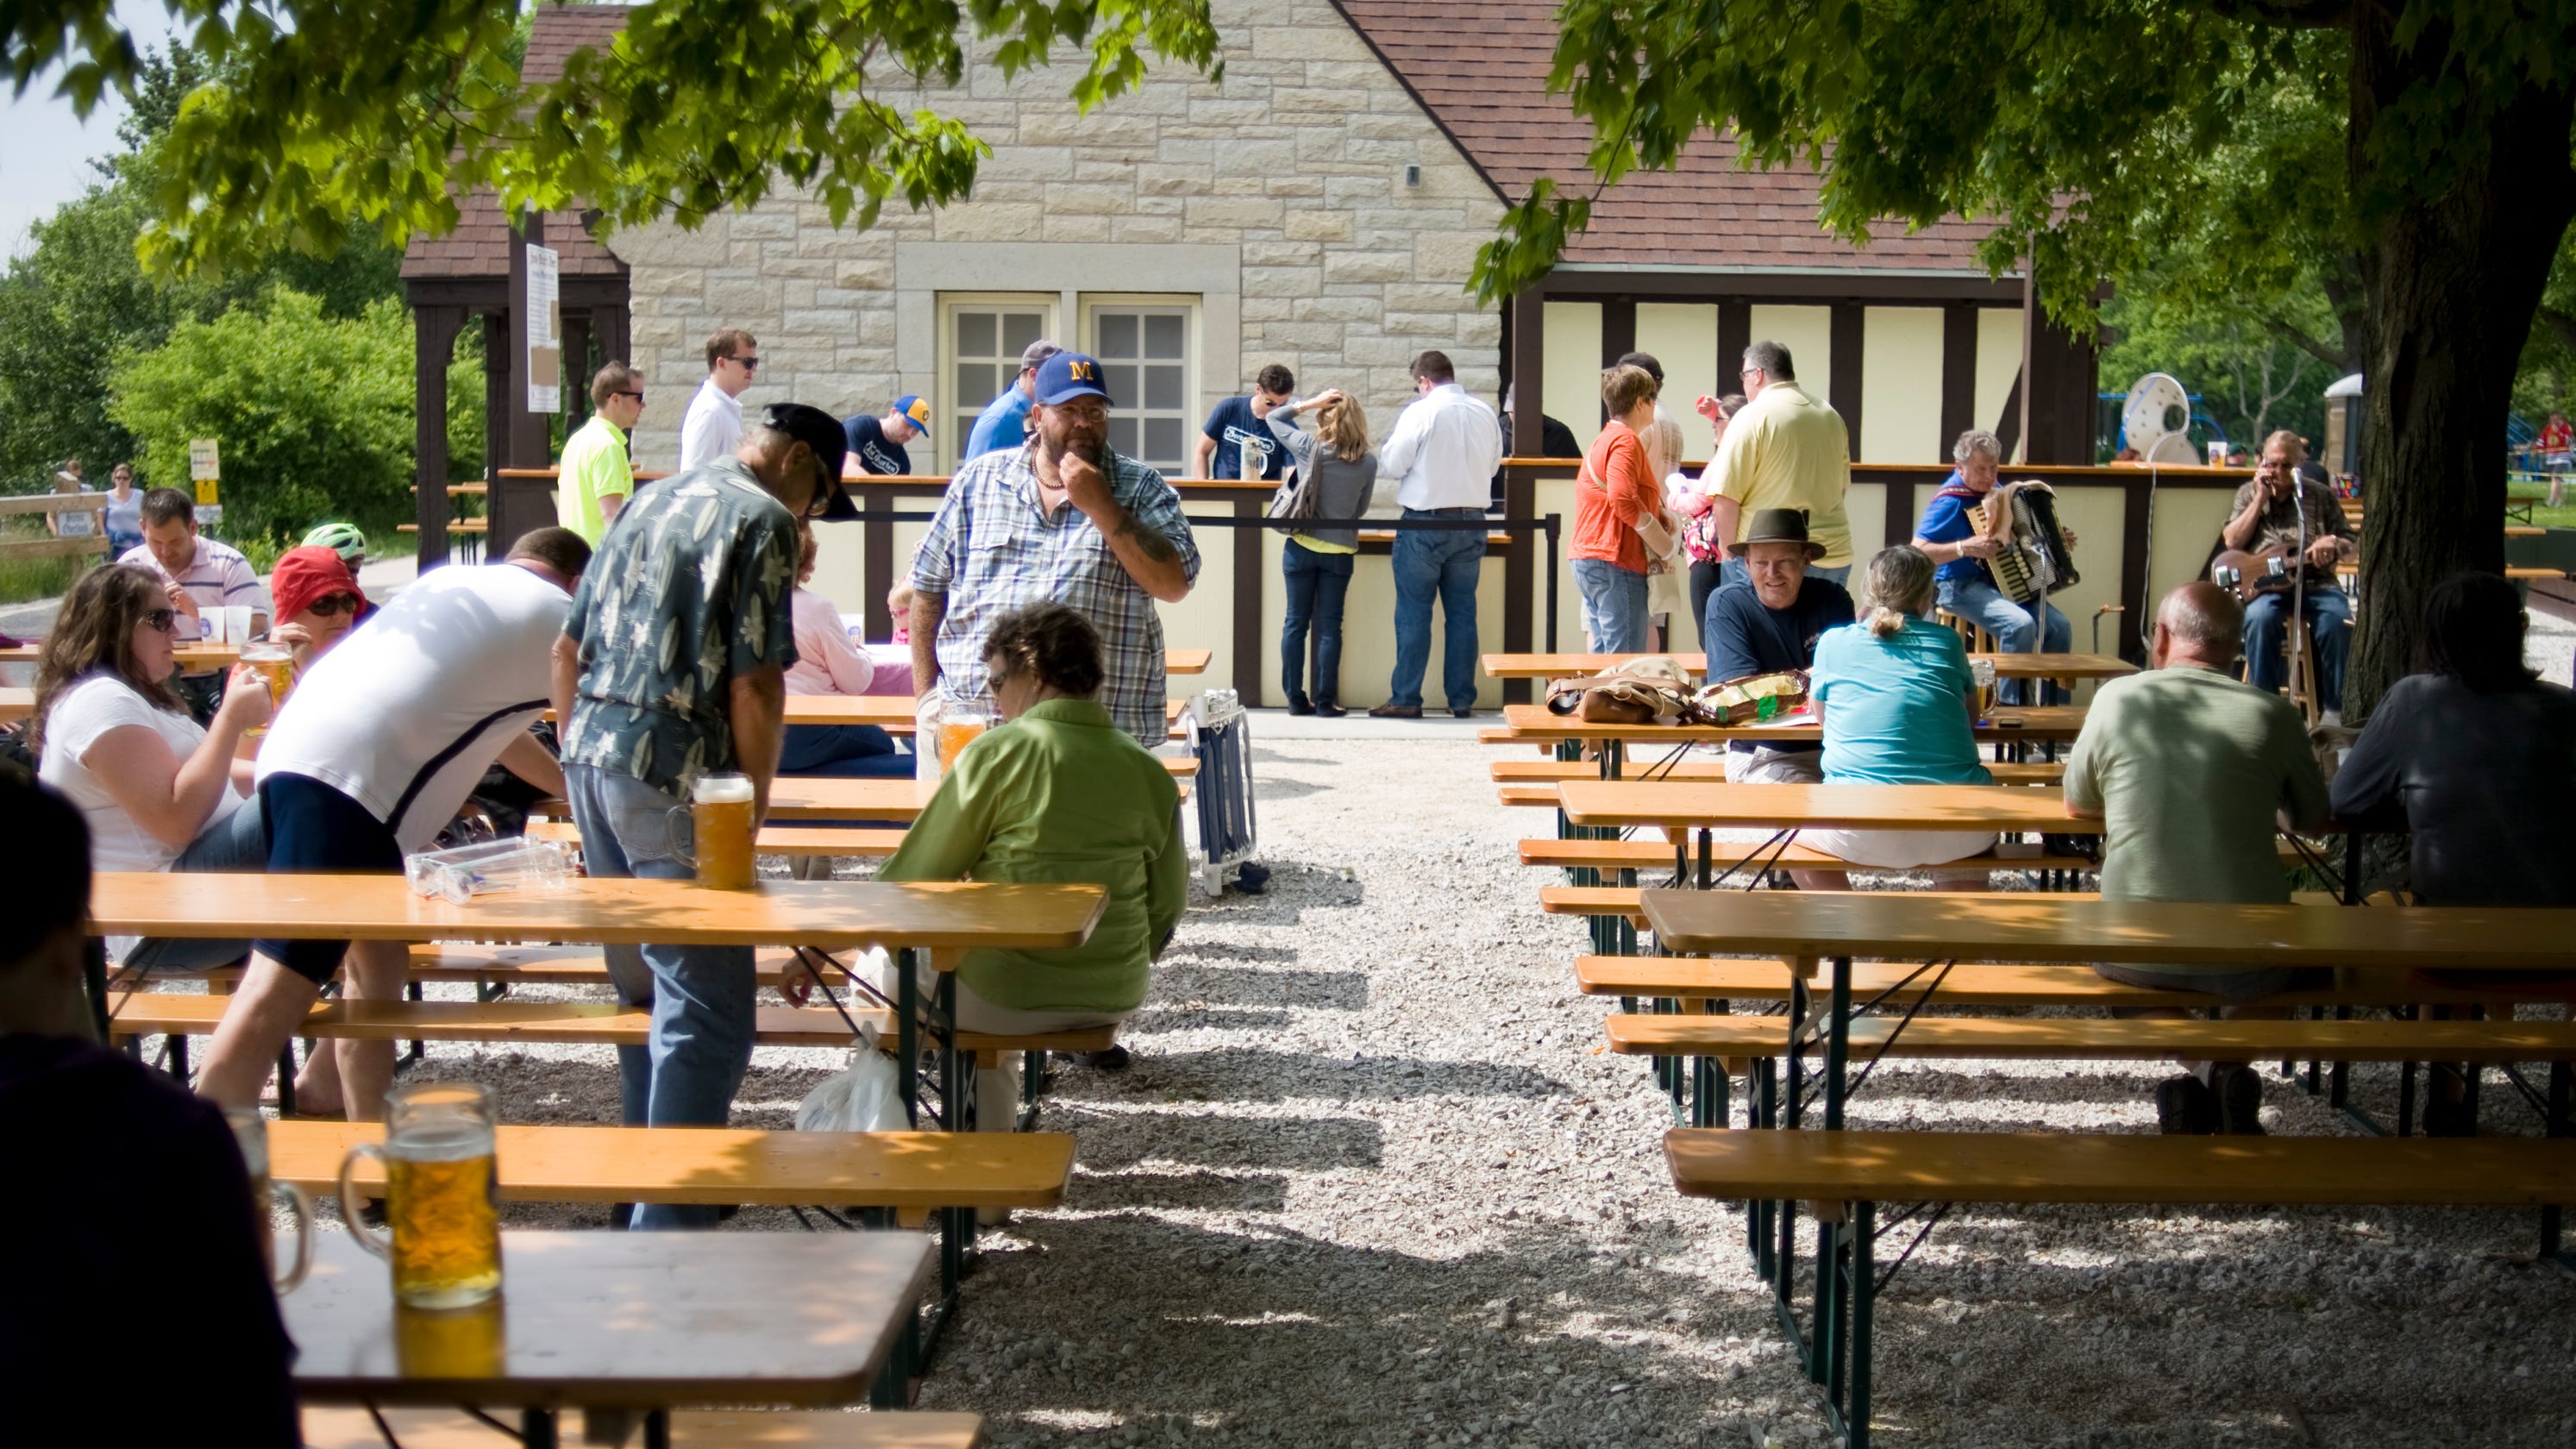 Estabrook Beer Garden Is Selling 100 Picnic Tables And Benches